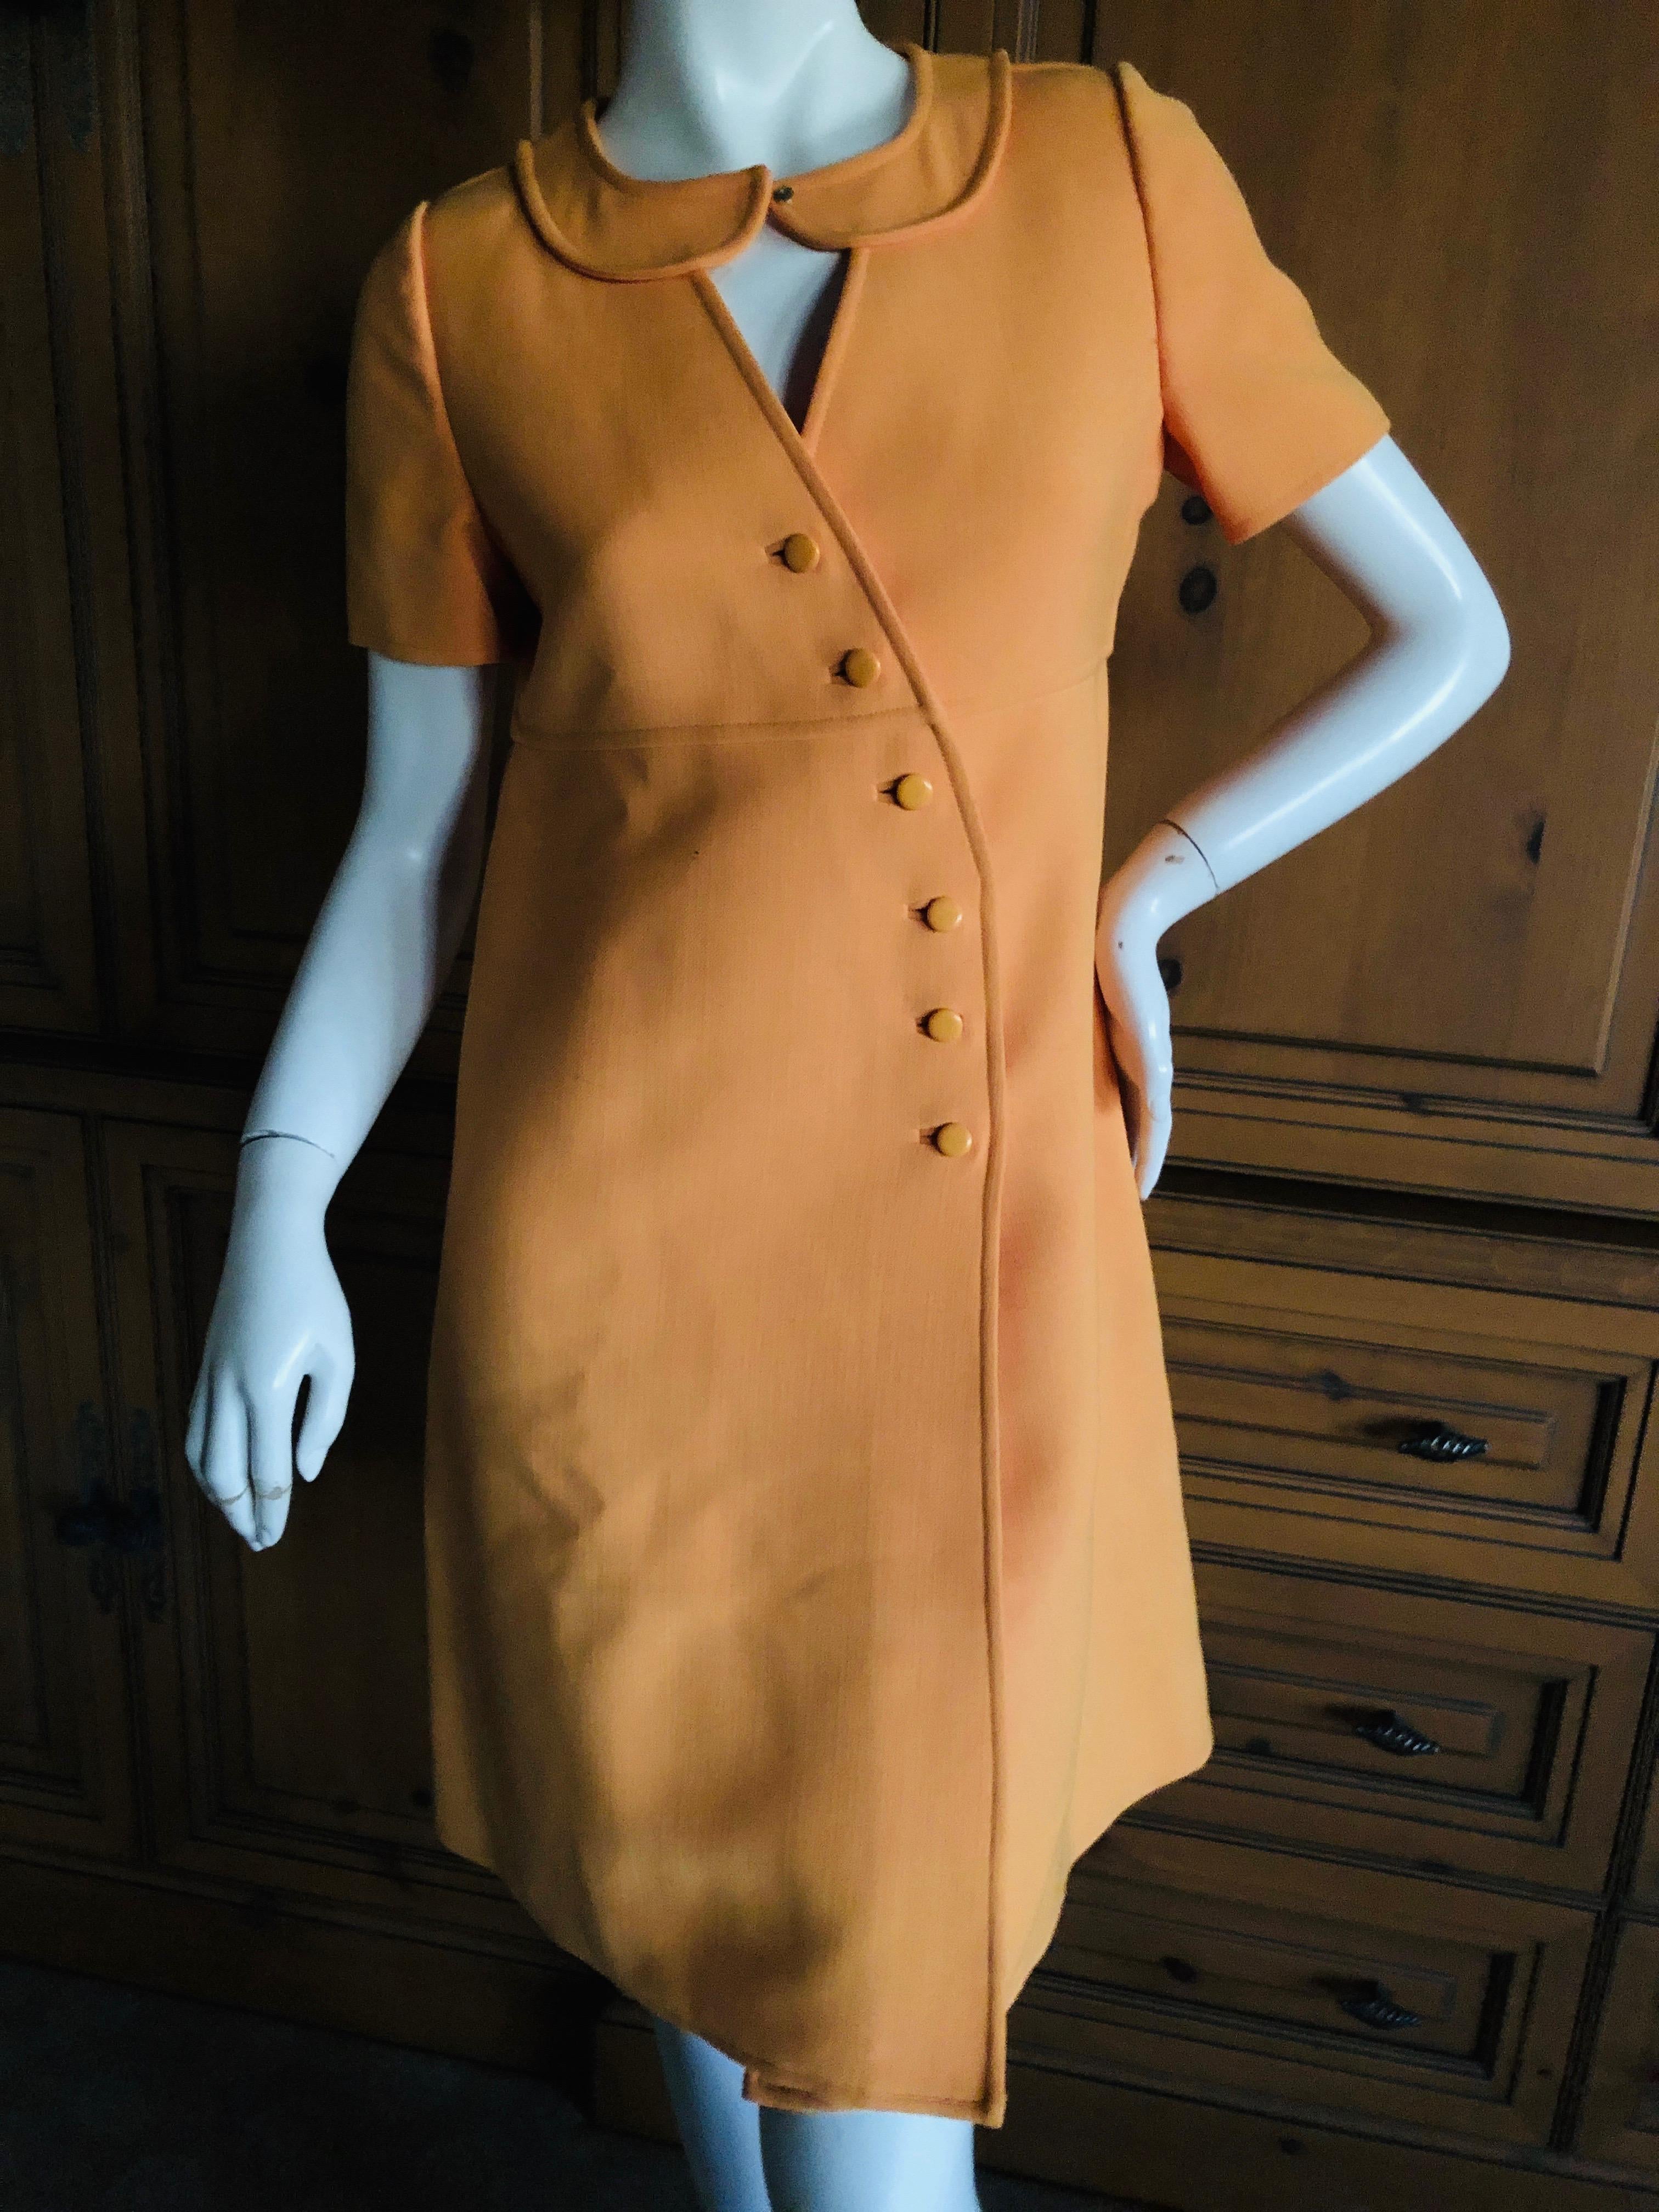 Courreges Paris Couture Future Numbered 1966 Orange Asymmetrical Snap Front Dress.
Courreges was considered very avant guard when he created his first MOD collection, shown with space age looking accessories and white Go Go boots in 1965.
This is